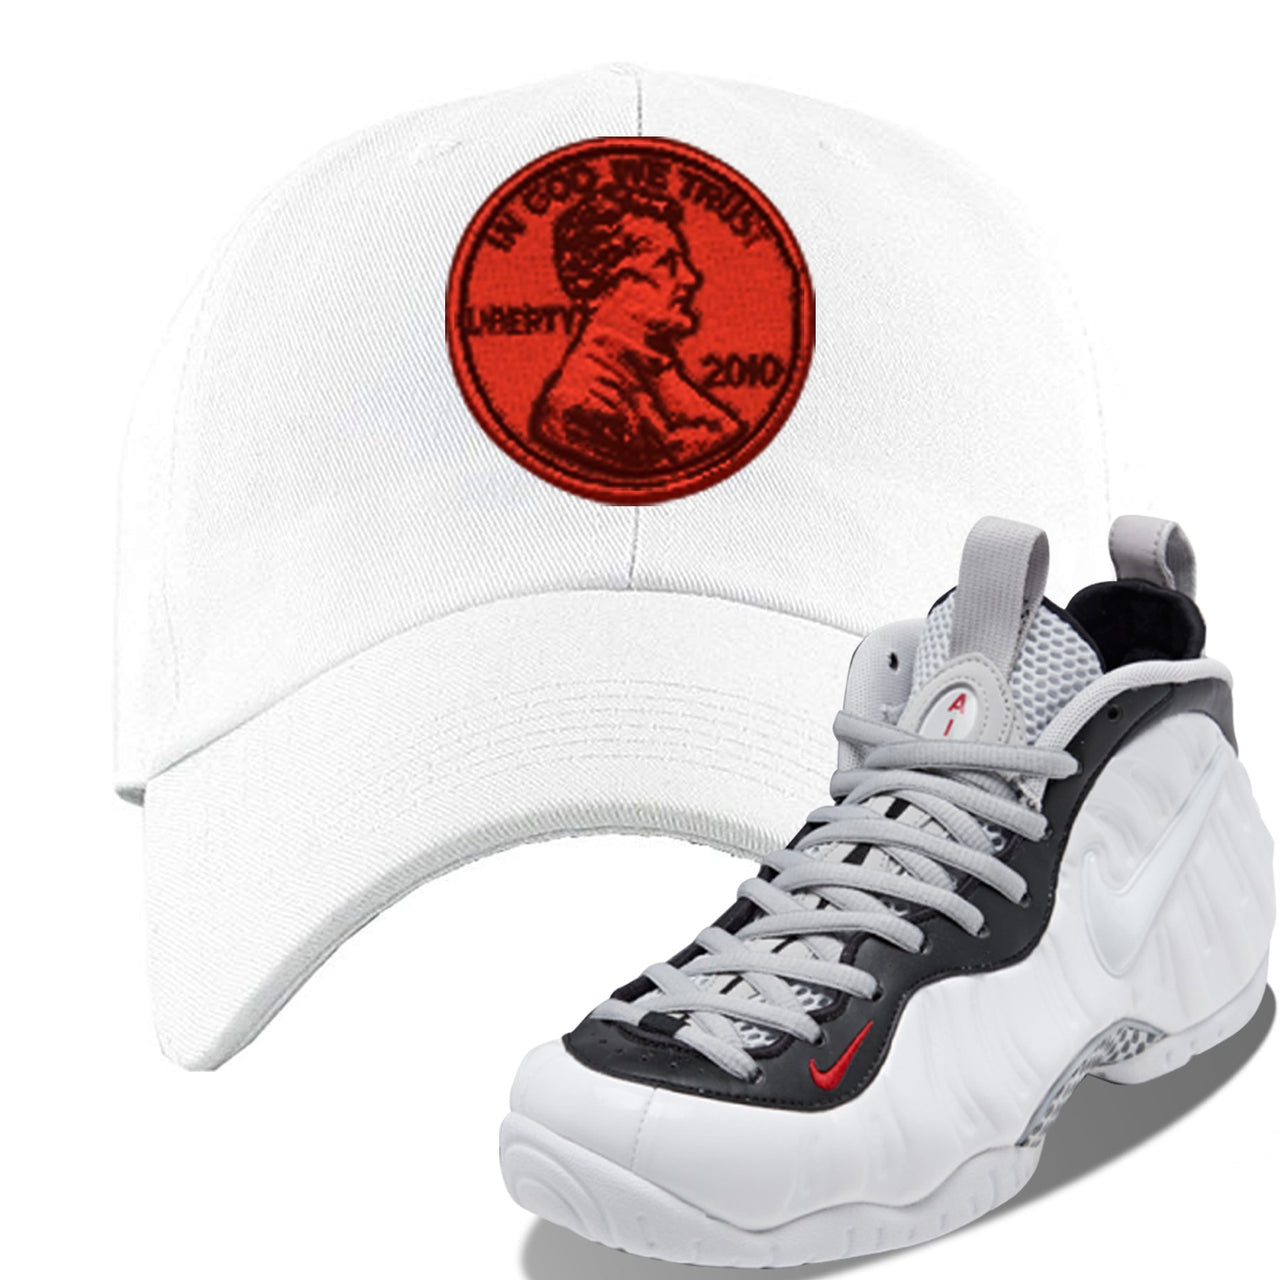 Foamposite Pro White Black University Red Sneaker White Dad Hat | Hat to match Nike Air Foamposite Pro White Black University Red Shoes | Penny